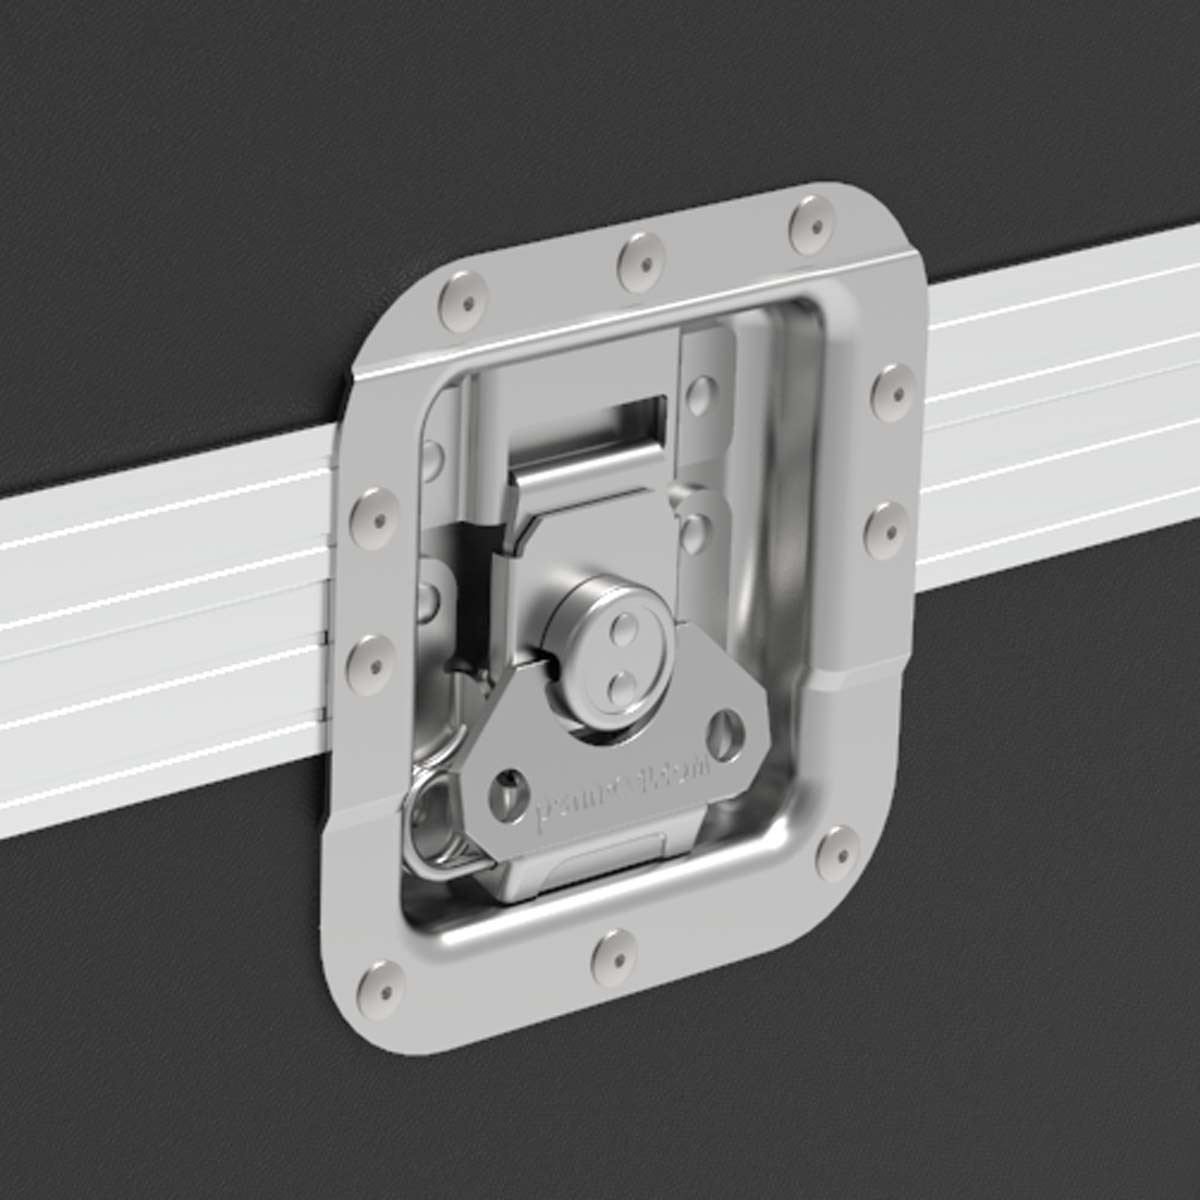 We are industry leaders in offering secure and effective latches